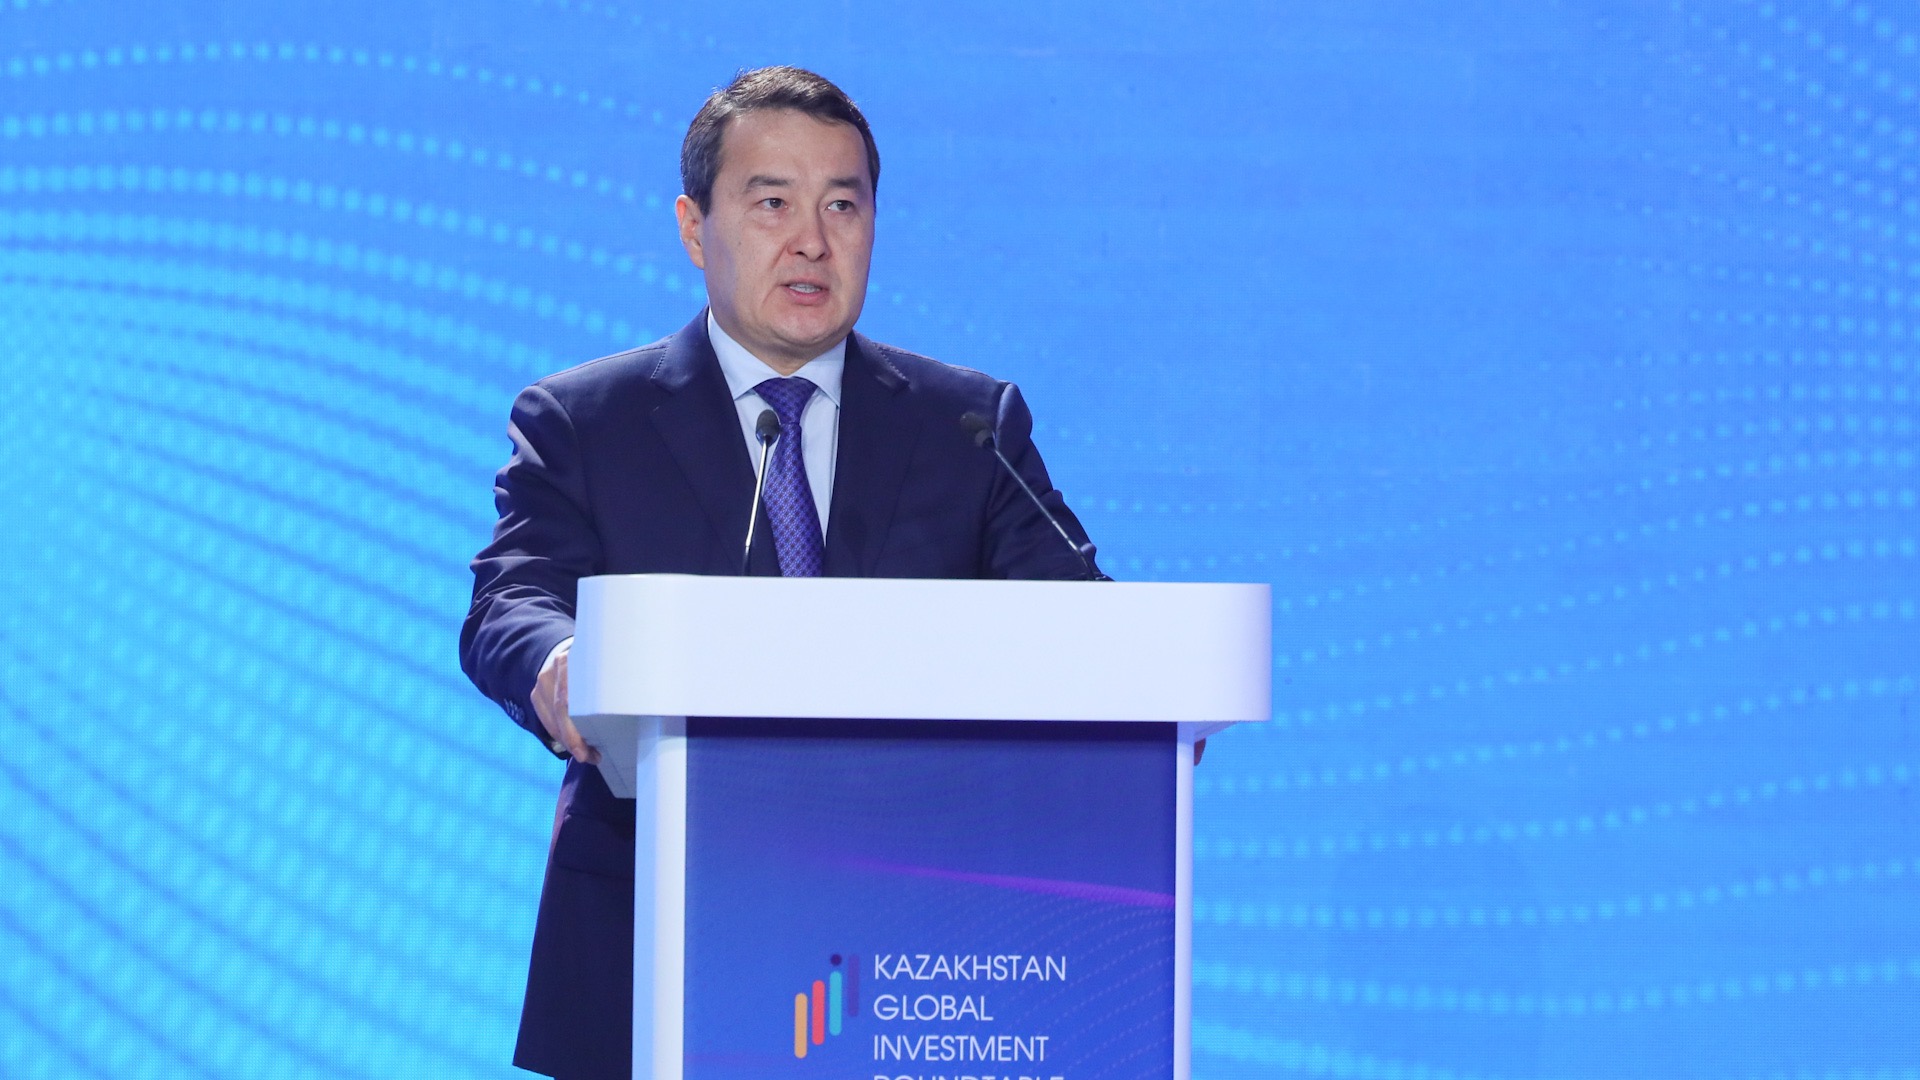 Kazakhstan aims to attract $150bn in foreign investment by 2029  